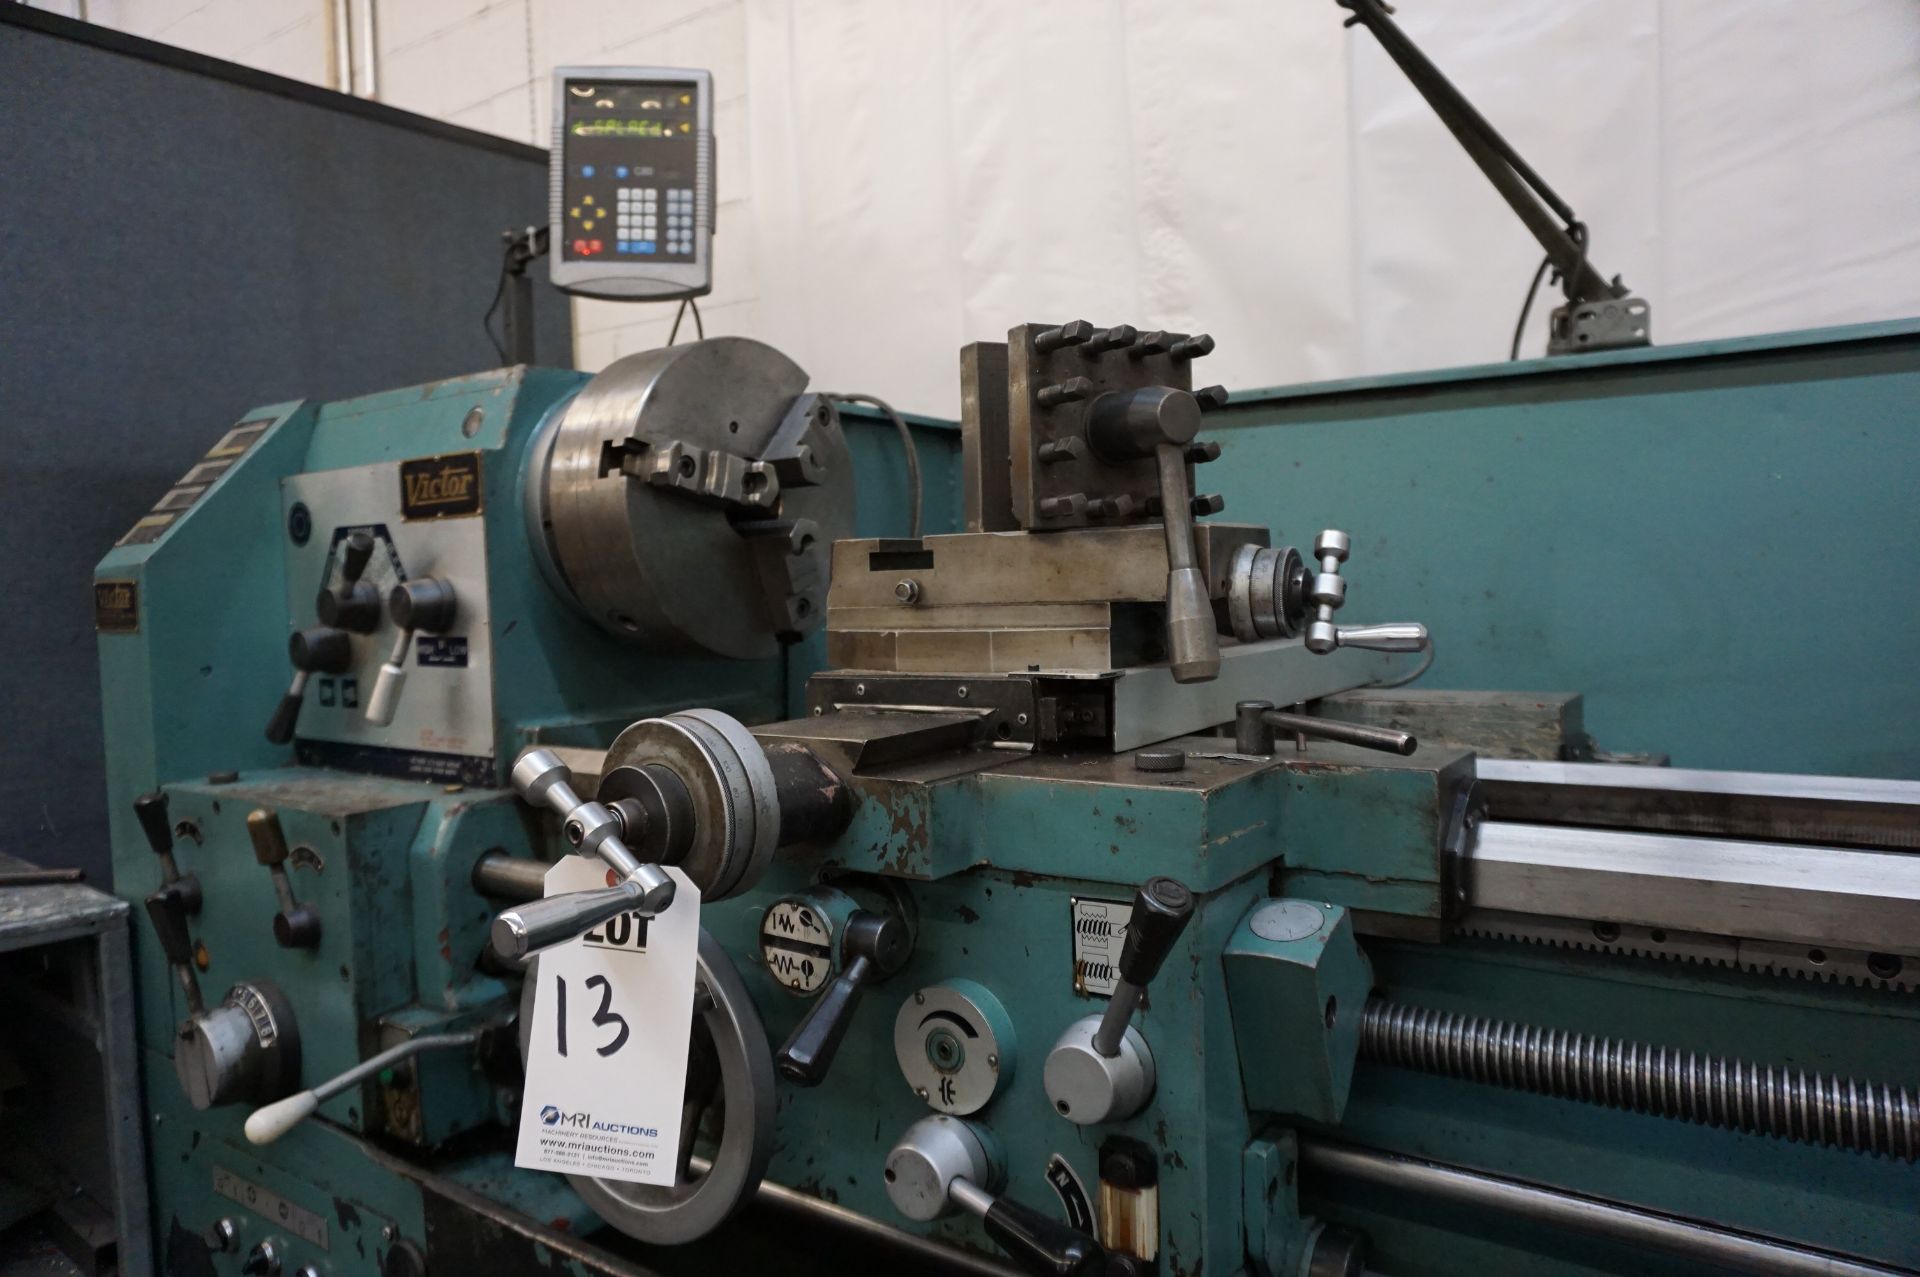 VICTOR 2080 ENGINE LATHE, S/N 710344, 10 HP, 220 V, CYCLES 60, 3 PHASE, CART WITH MANUALS, CHUCKS, - Image 3 of 10